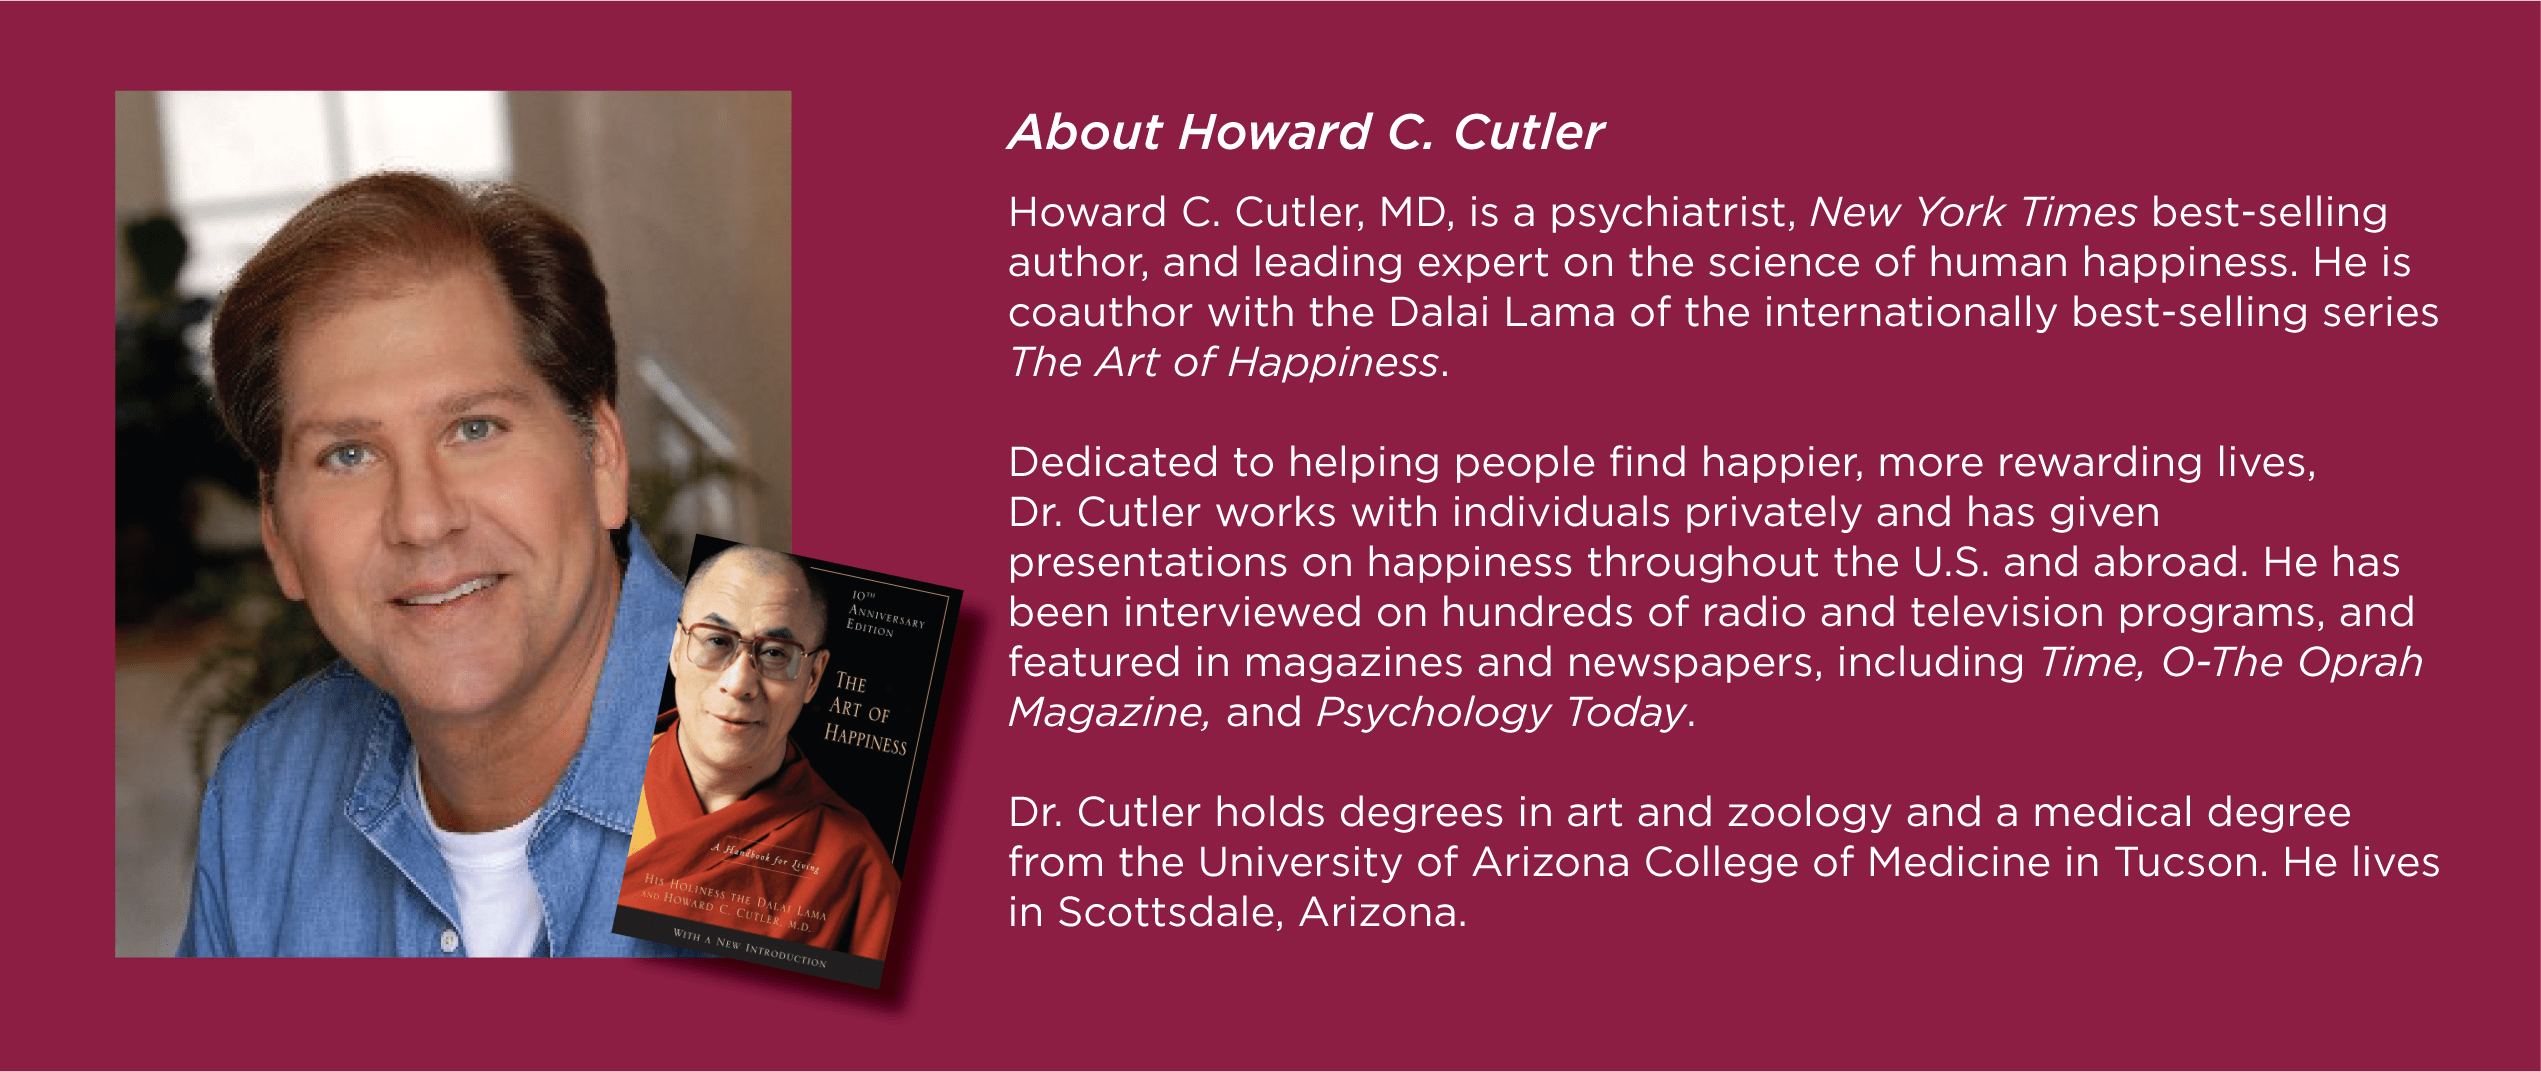 About Howard C. Cutter graphic